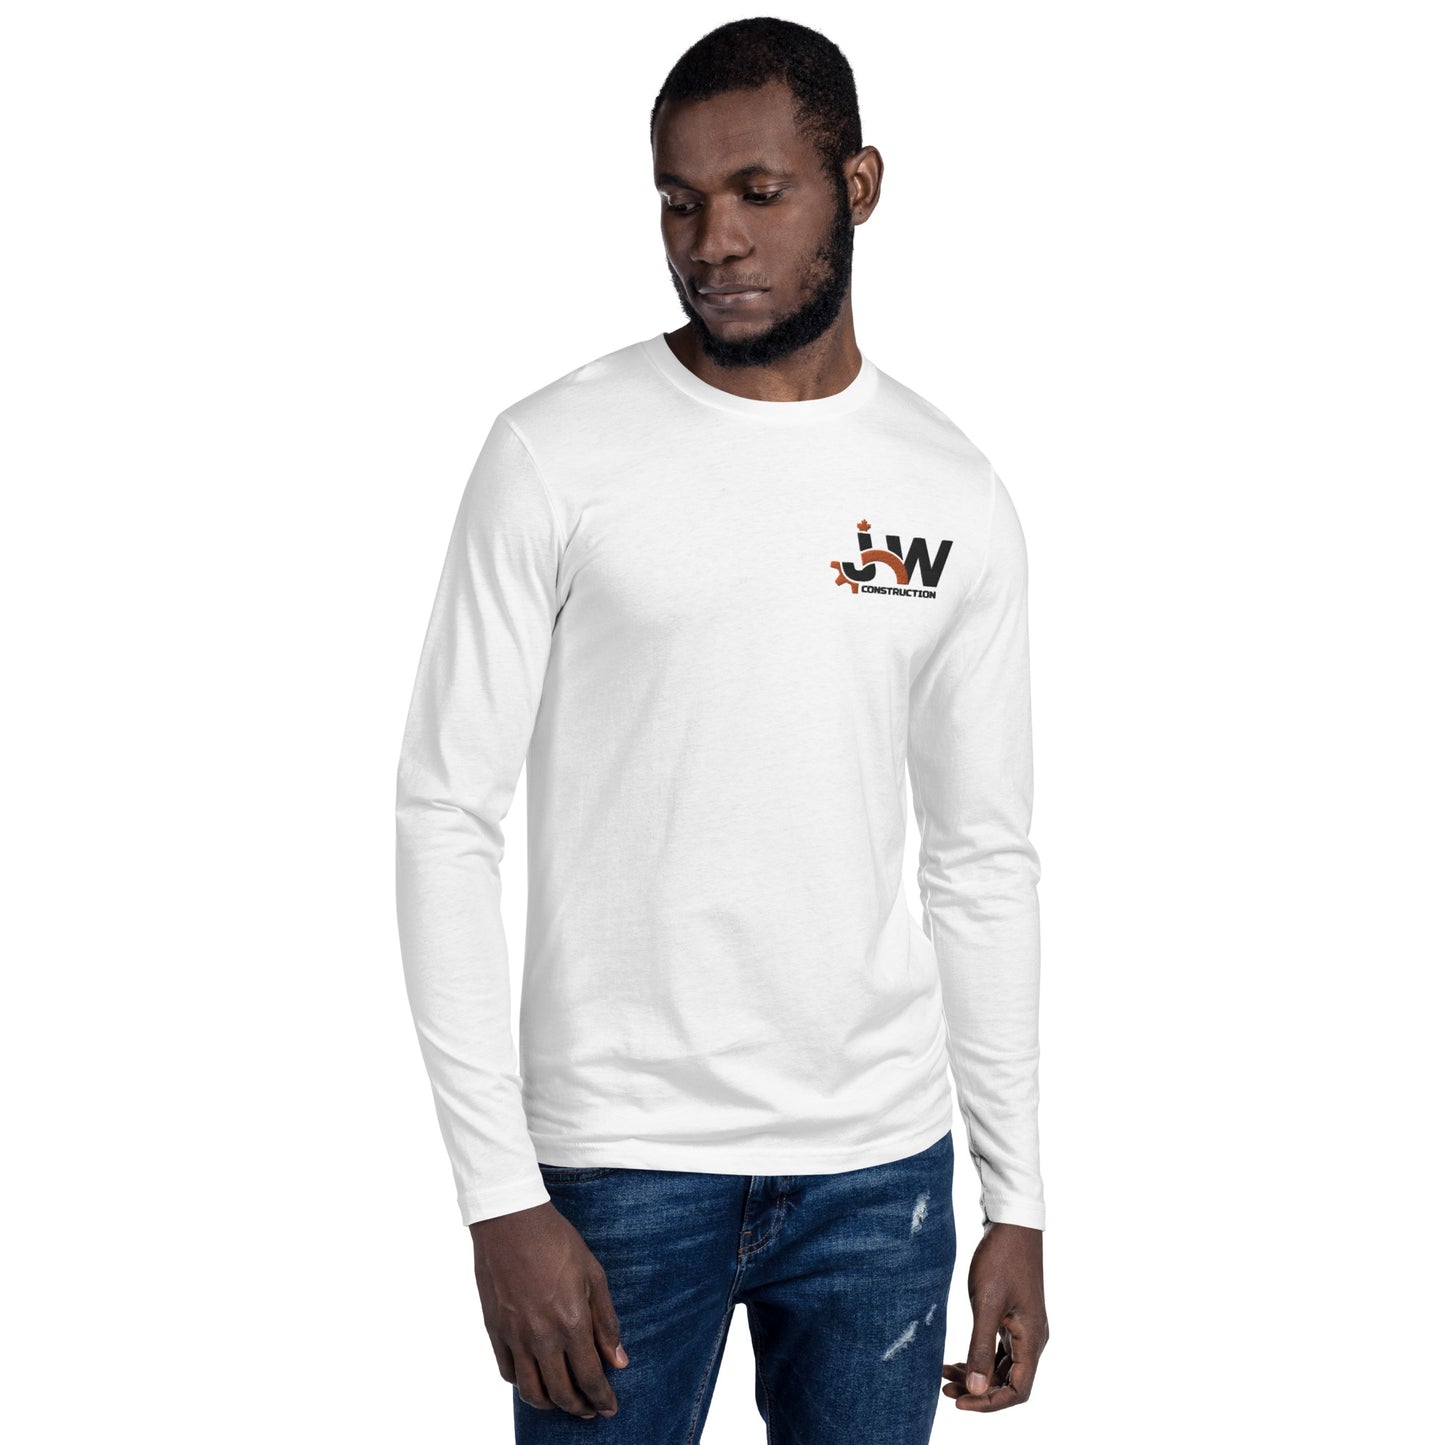 JHW Long Sleeve with Embroidery